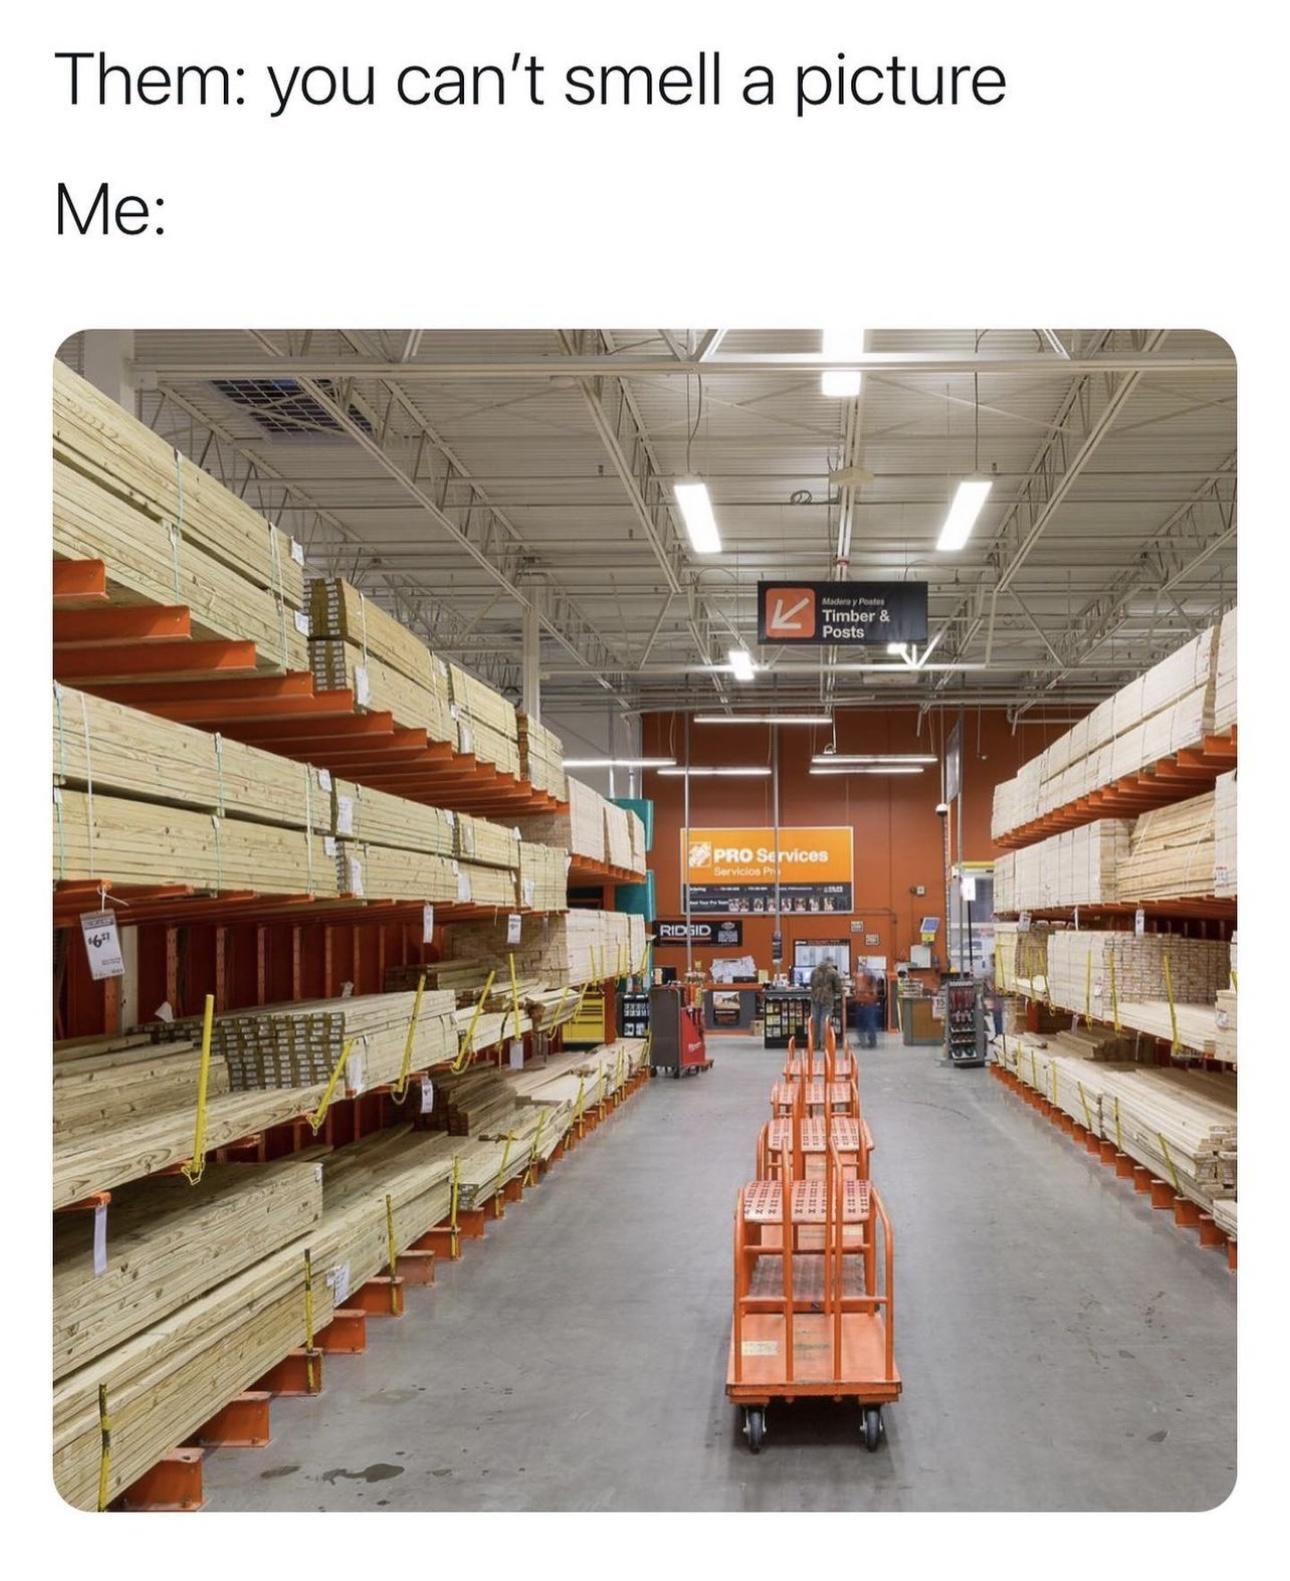 them, you can't smell a picture, me, timber and posts aisle at home depot